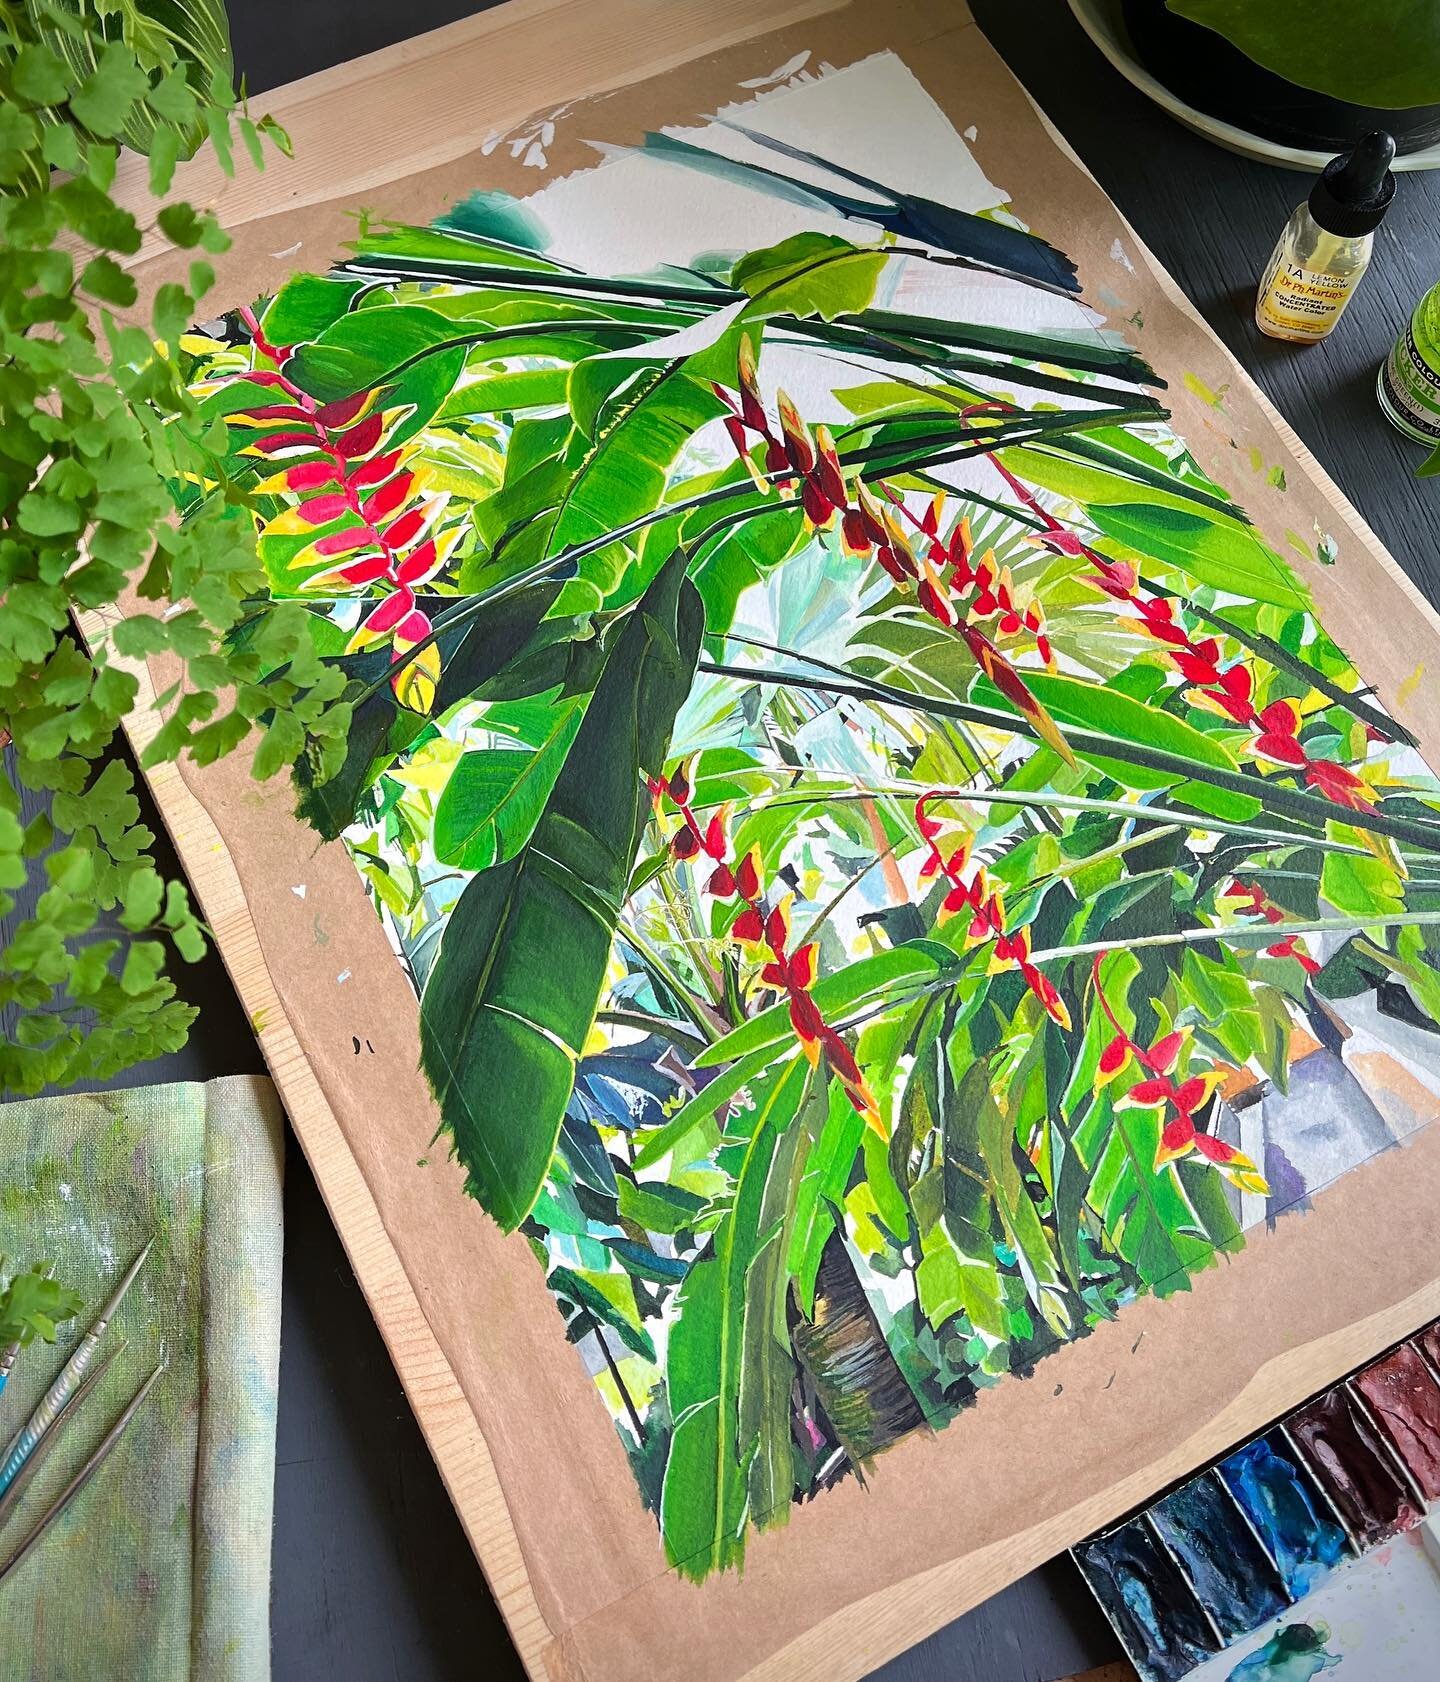 🌱✨It is always fun to research the plants I paint because I always learn something new! 👩&zwj;🎨

🌿🌴 Heliconia rostrata is commonly known as South American Hanging Lobster Claw. It is recognizable from its colourful red bracts, which are protecti